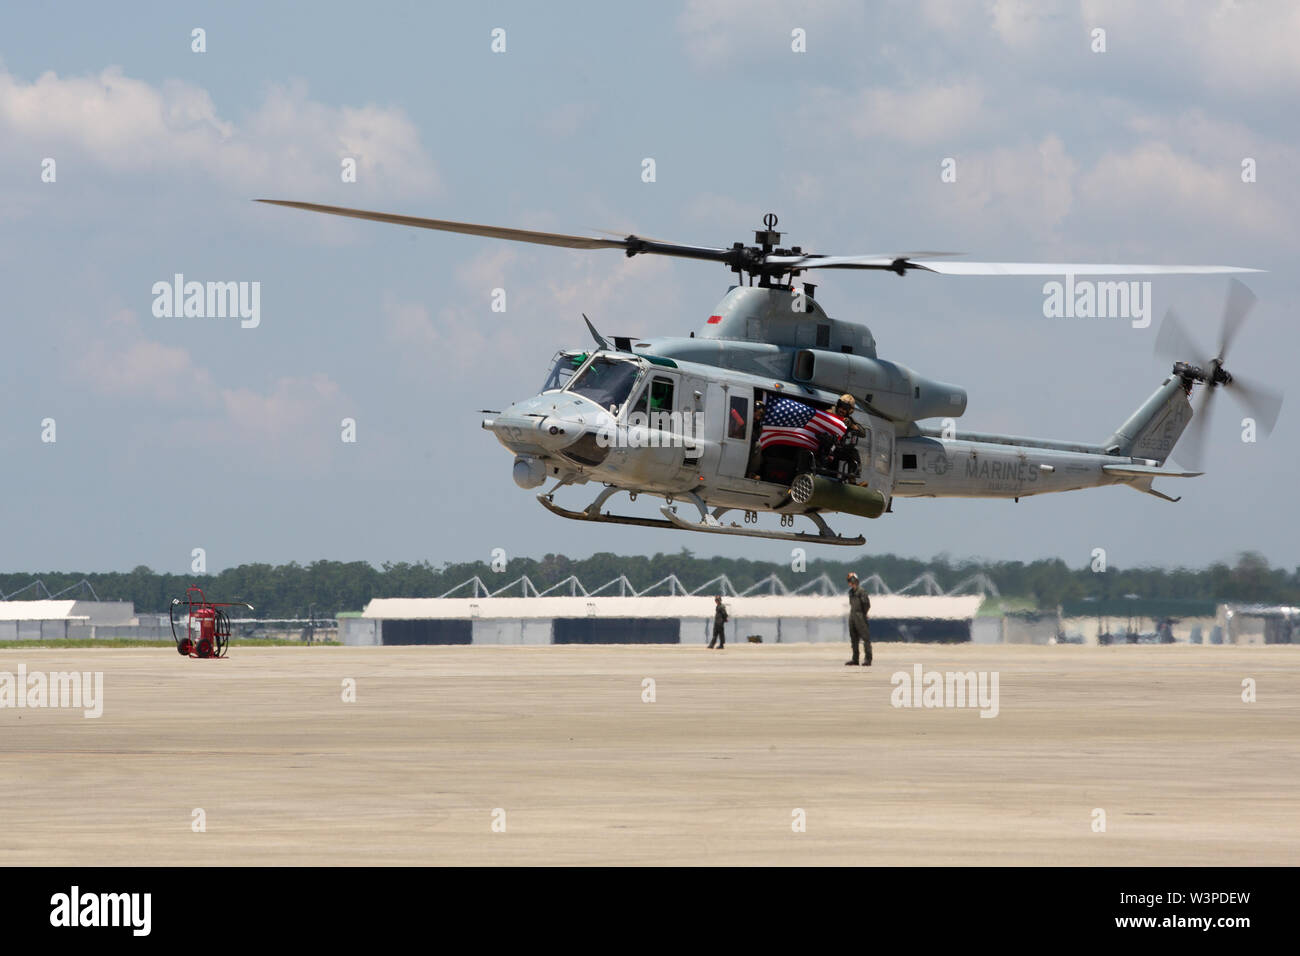 A U.S. Marine Corps UH-1Y Huey assigned to Marine Medium Tiltrotor Squadron (VMM) 264 prepare for landing during a homecoming reception at Marine Corps Air Station New River, North Carolina, July 14, 2019. Marines with VMM-264 returned from a deployment with the 22nd Marine Expeditionary Unit. (U.S. Marine Corps photo by Cpl. Cody Rowe) Stock Photo